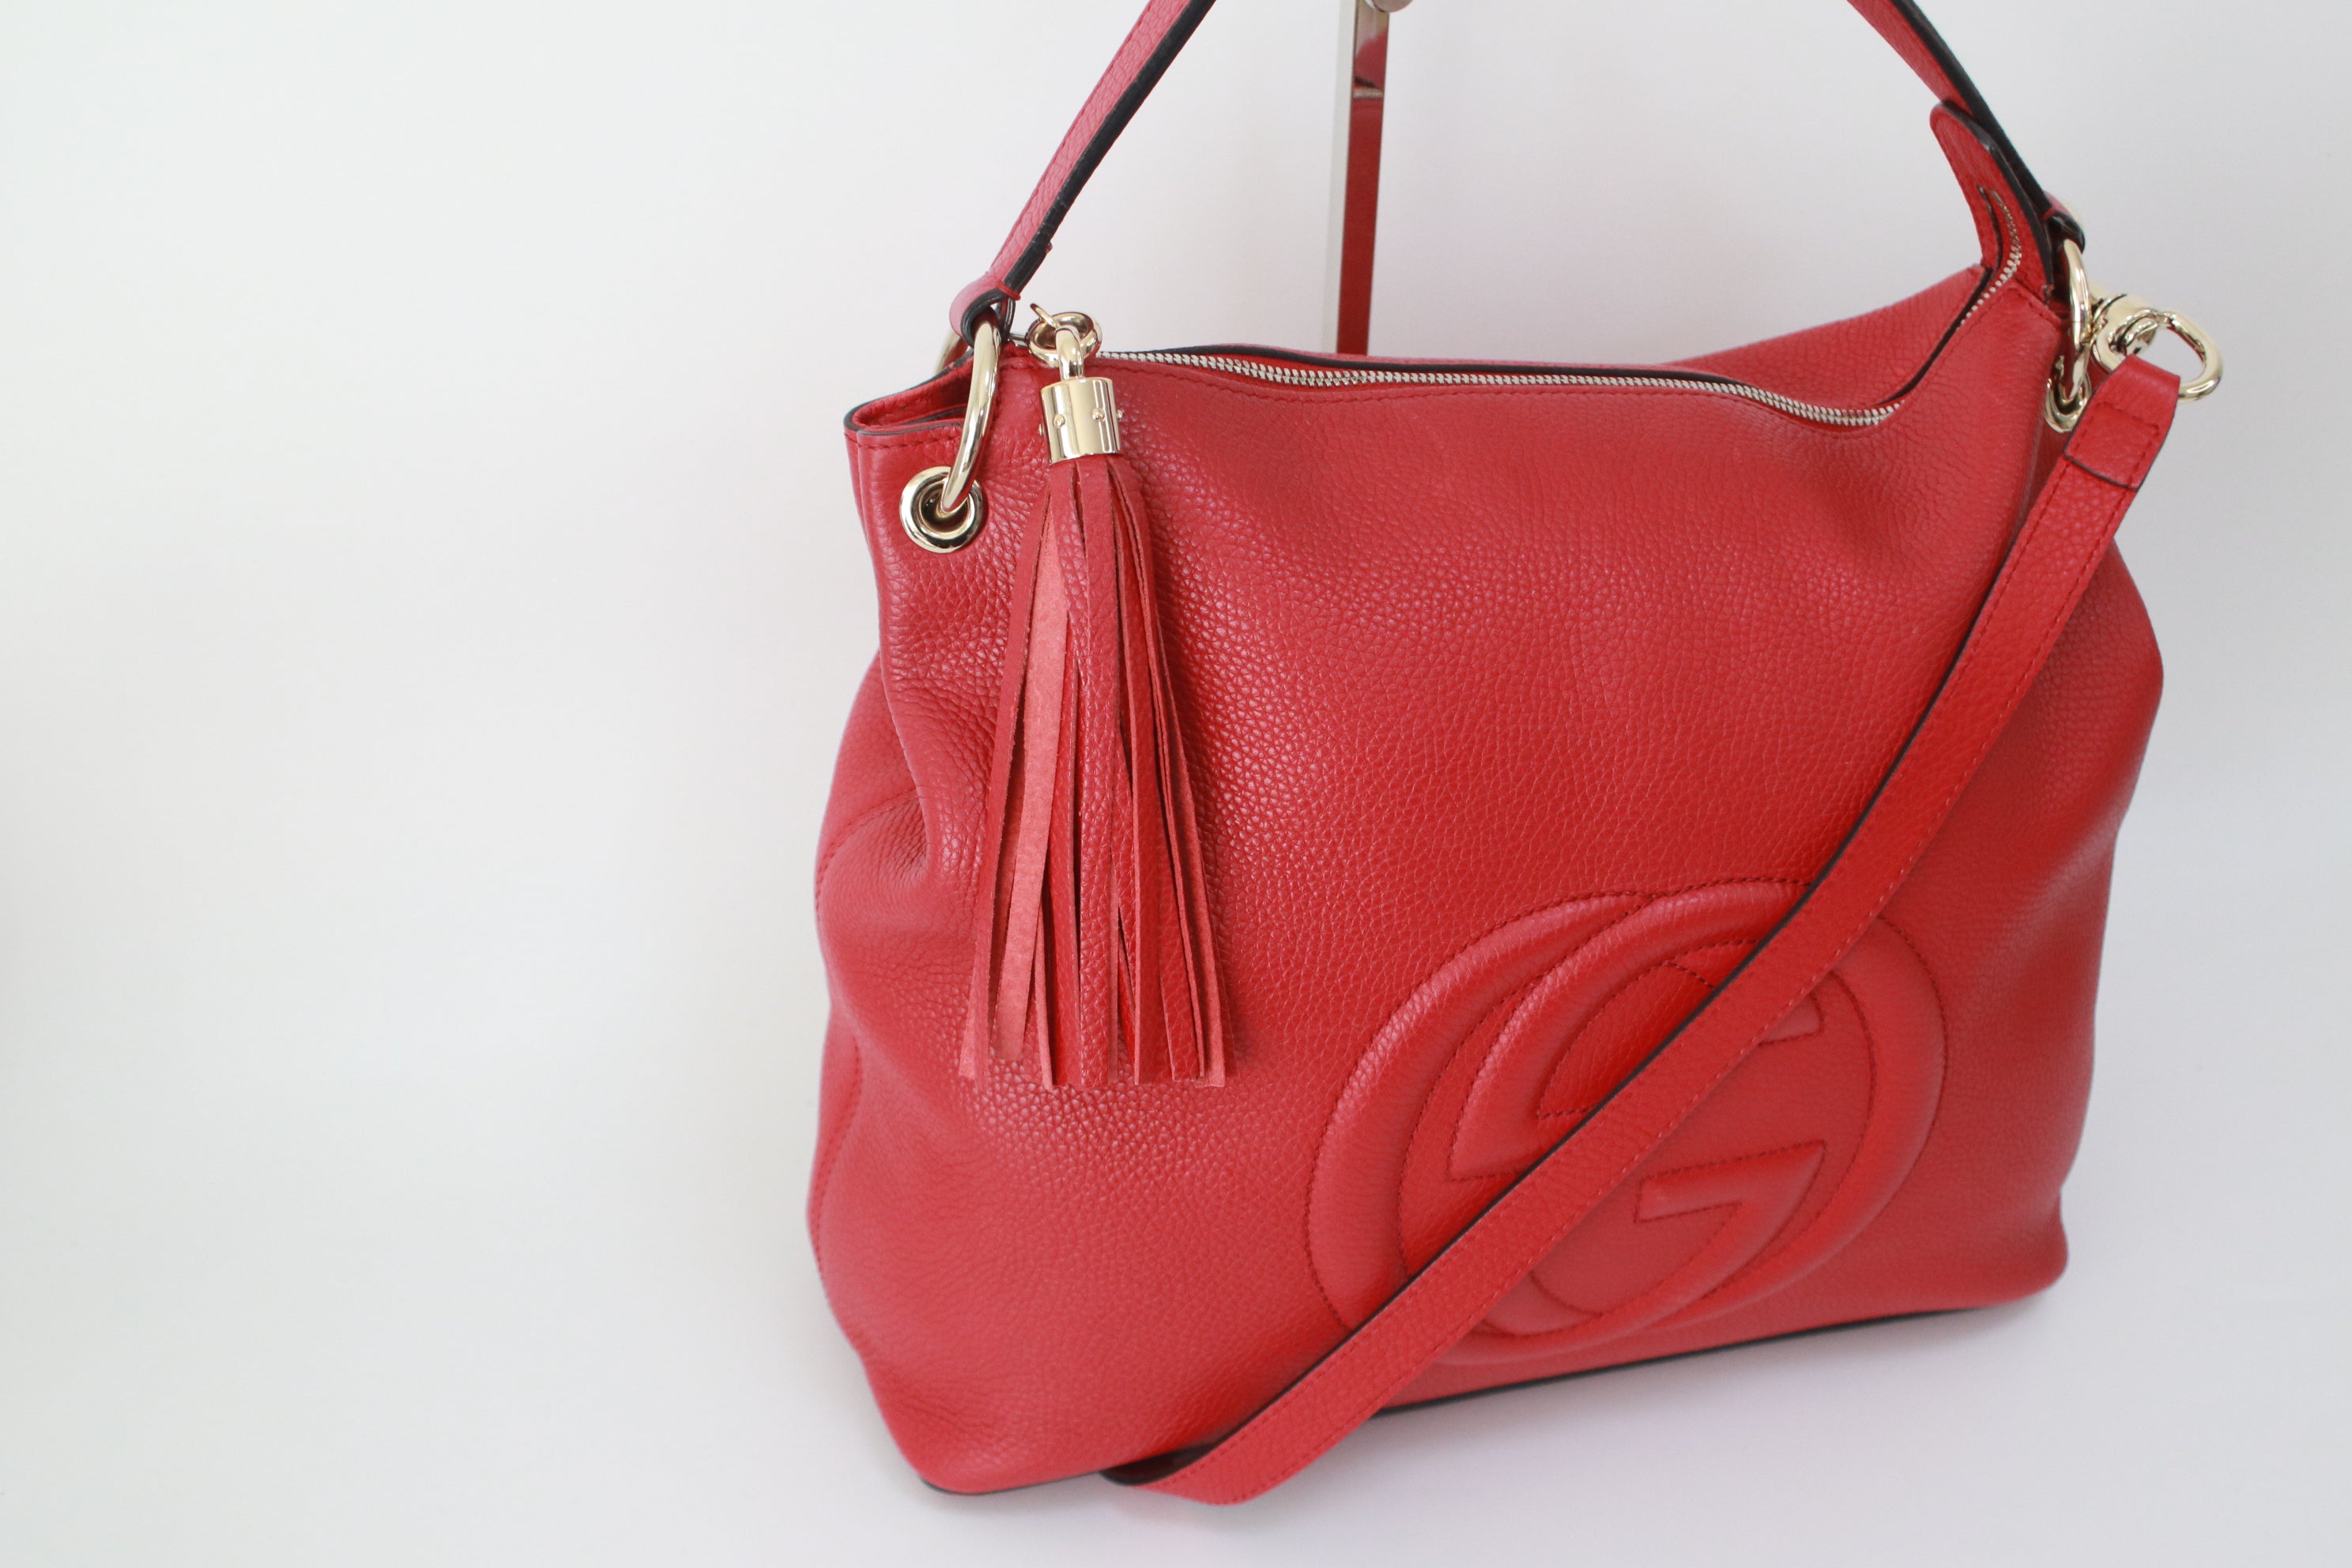 Gucci Soho Hobo Two Way Shoulder Bag/Red Used (6923)